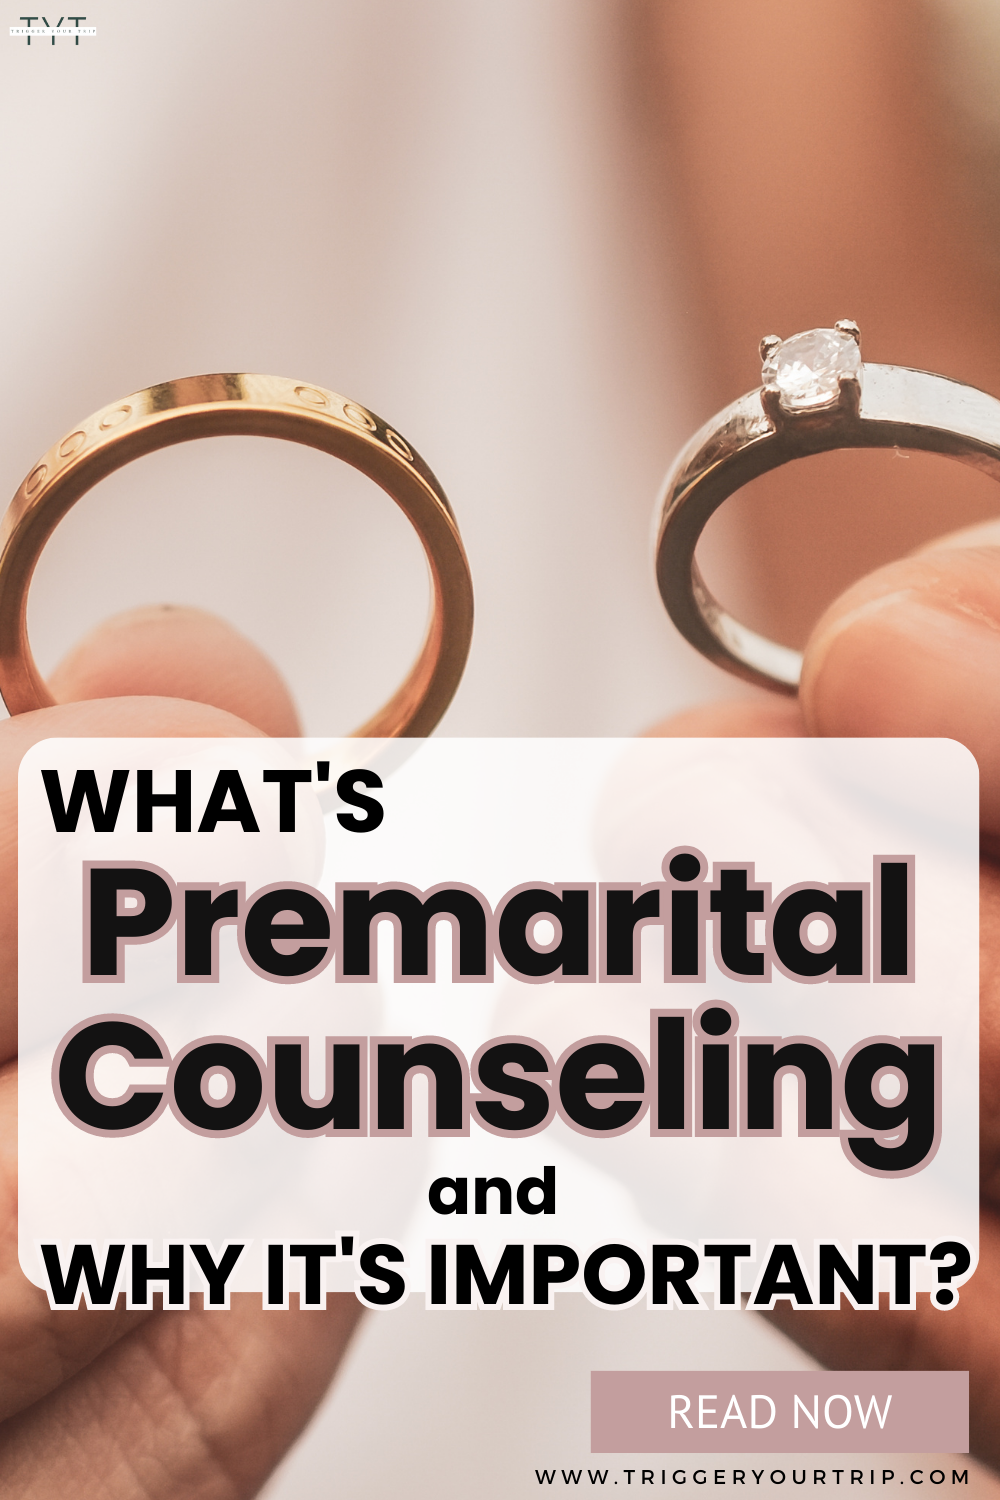 What is premarital counseling (marriage counseling) and why are premarital counseling questions so important? 